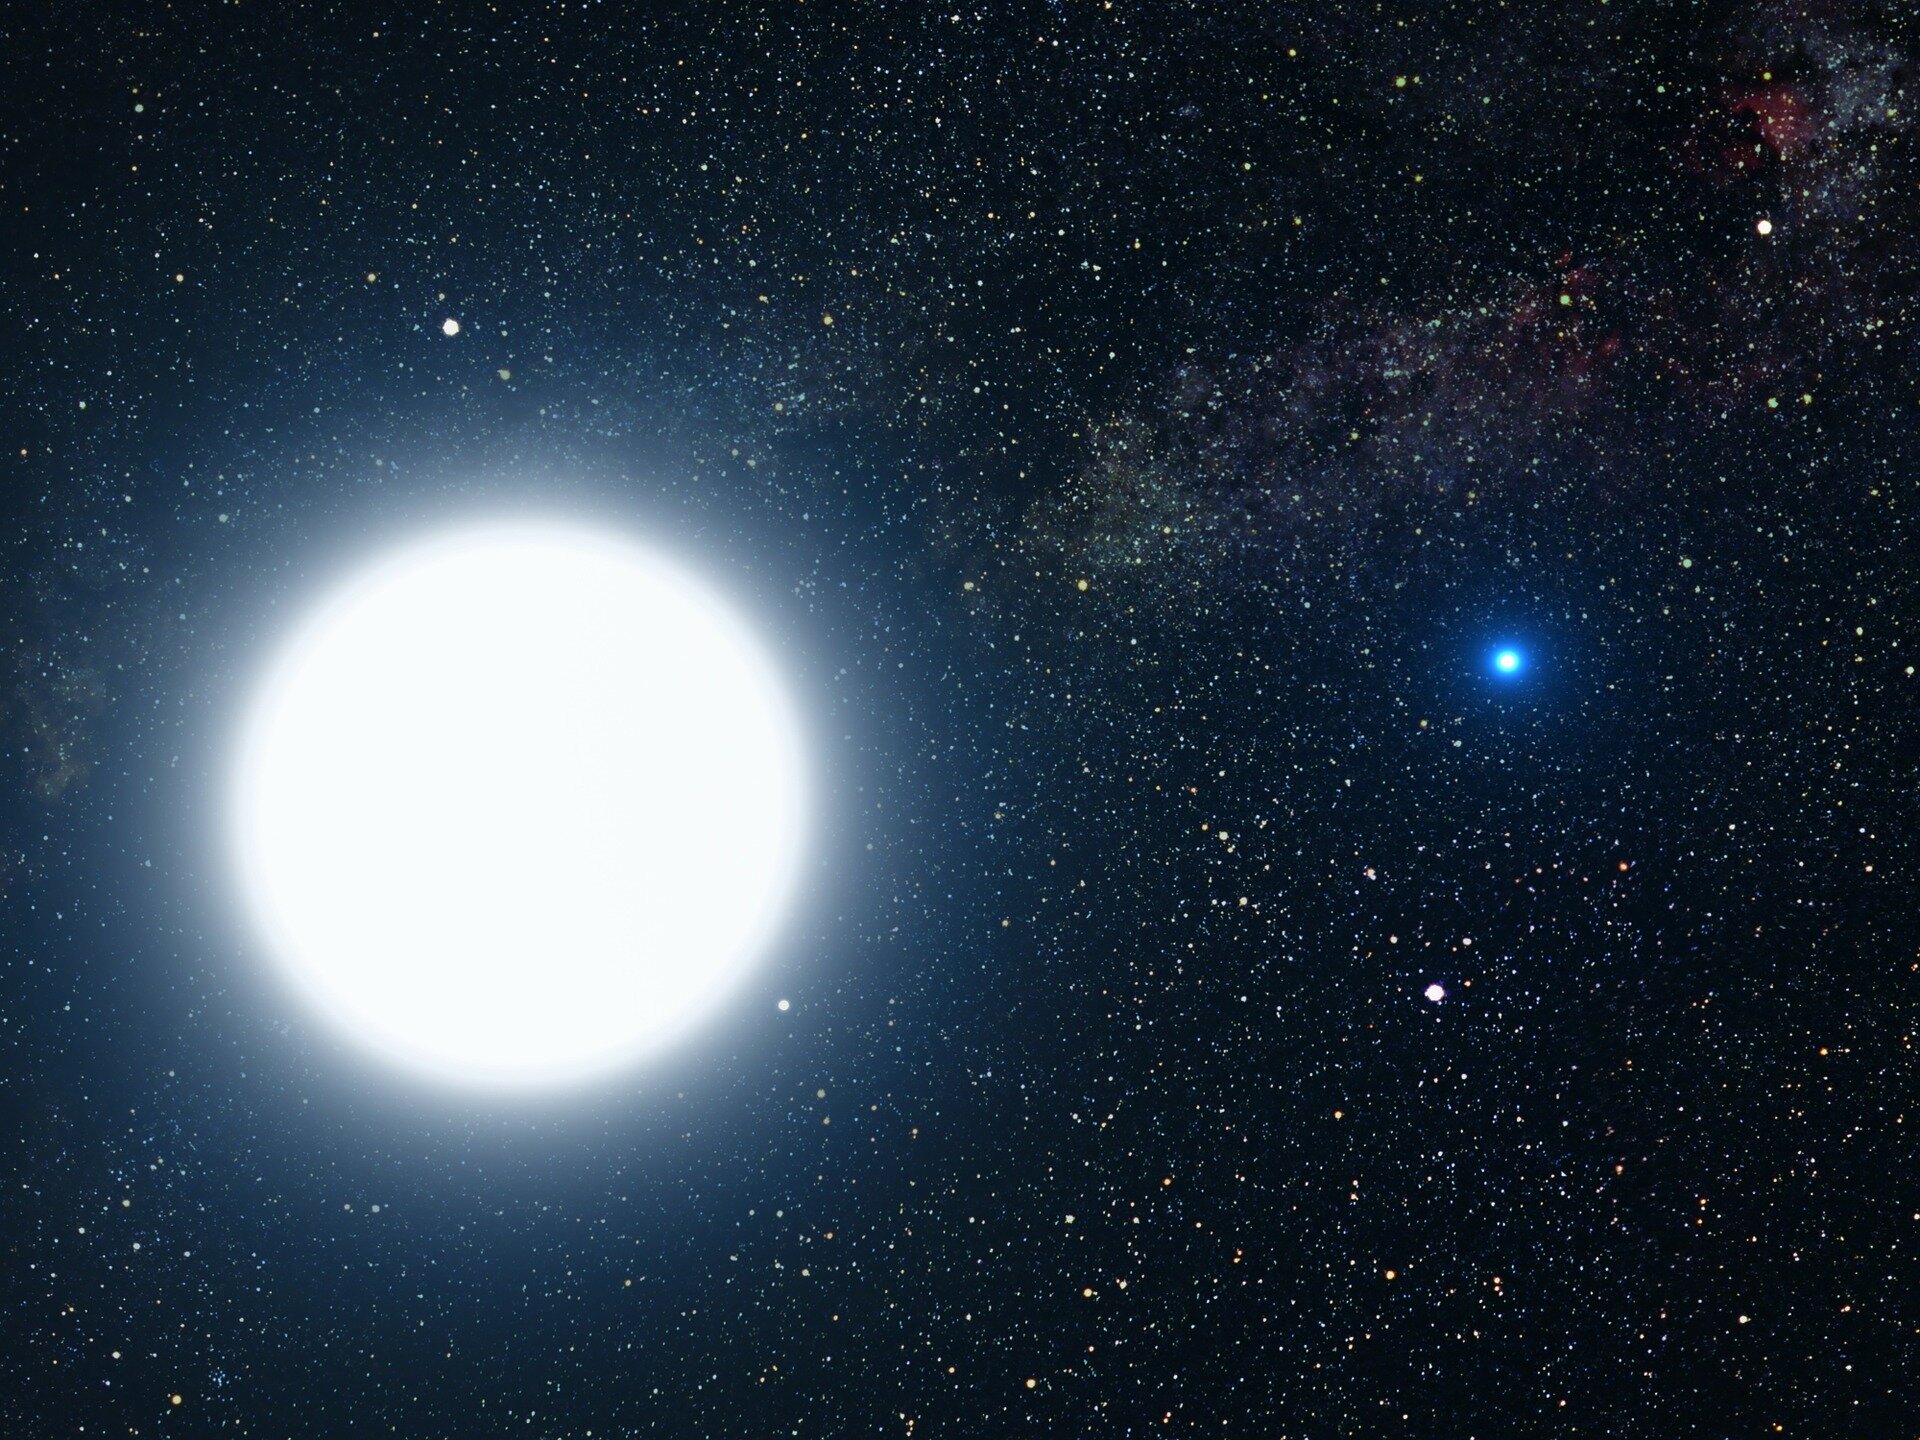 Astronomers find a 'cataclysmic' pair of stars with the shortest orbit yet